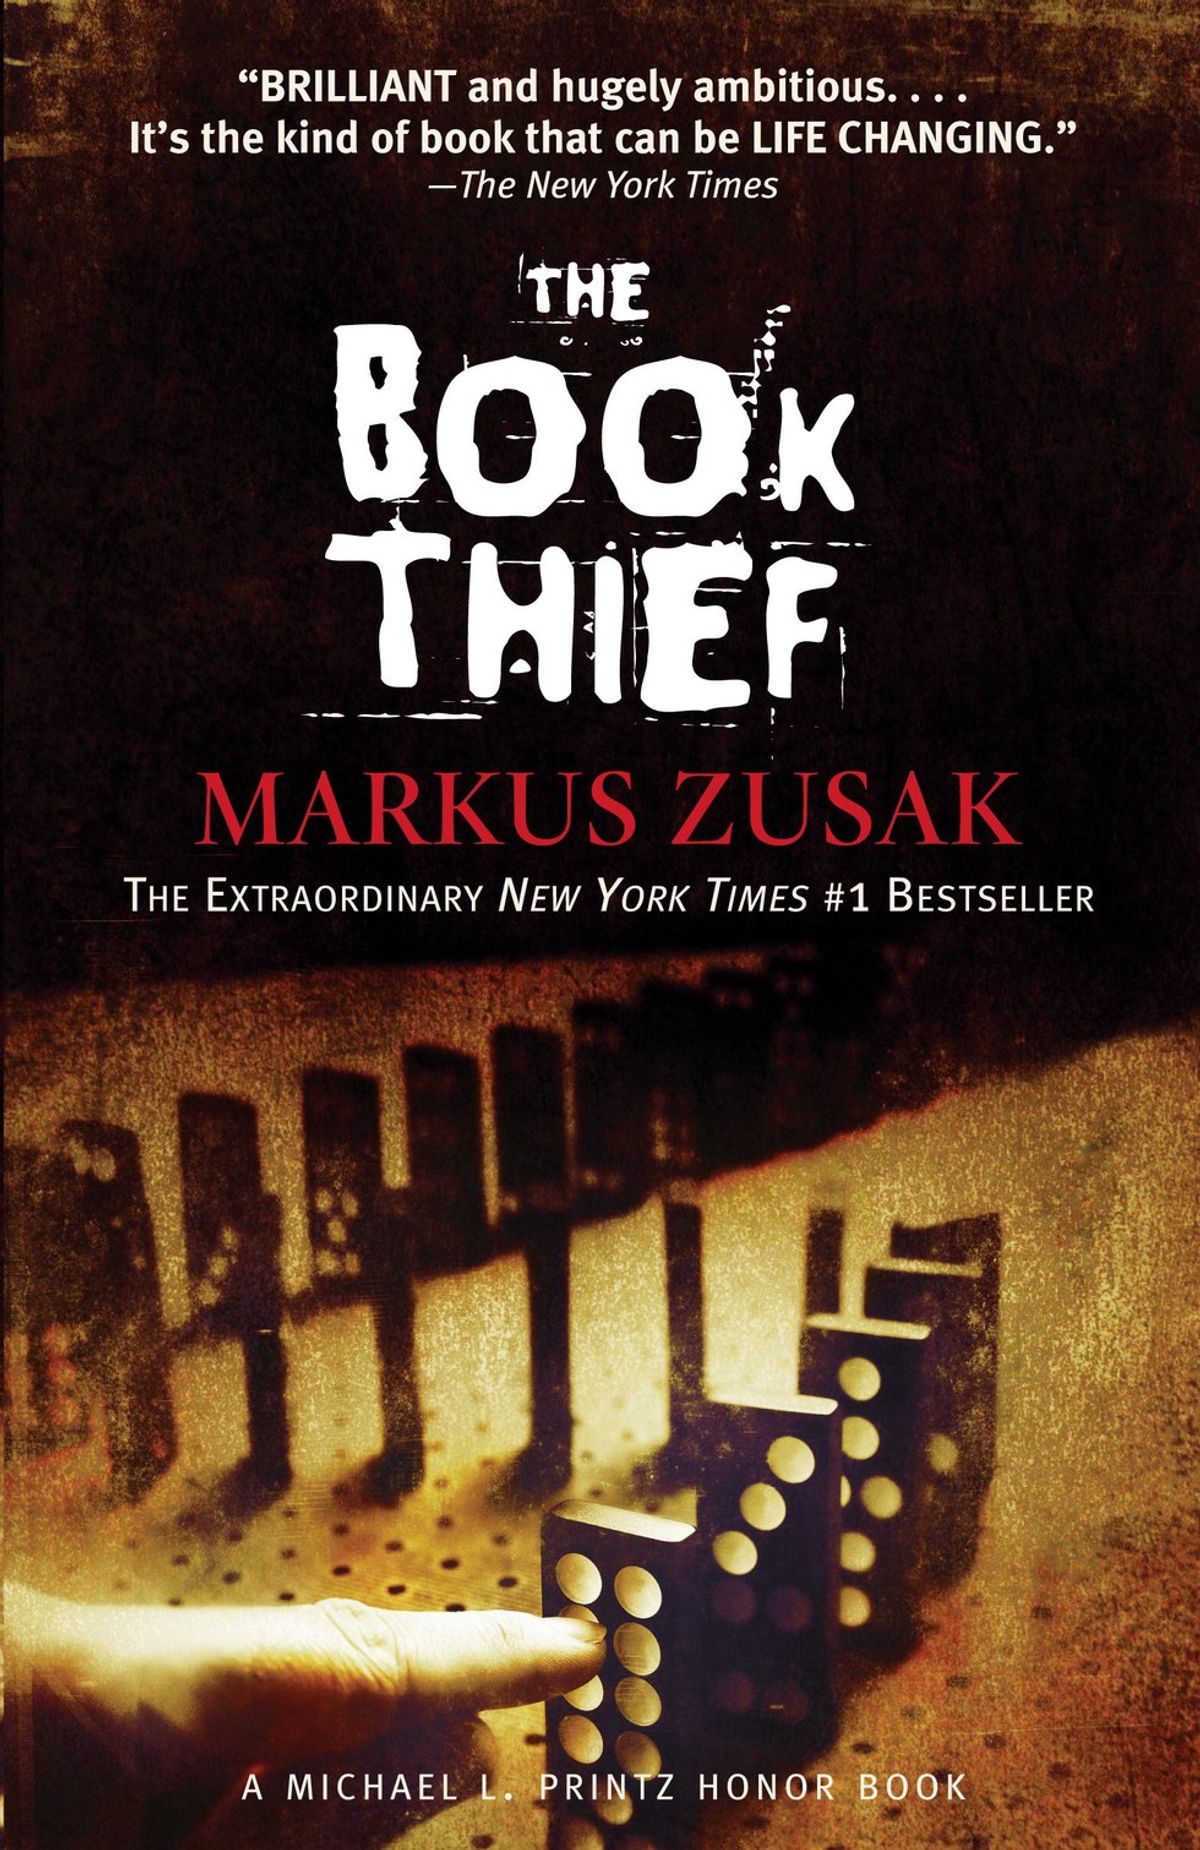 Ten Best Quotes From "The Book Thief"